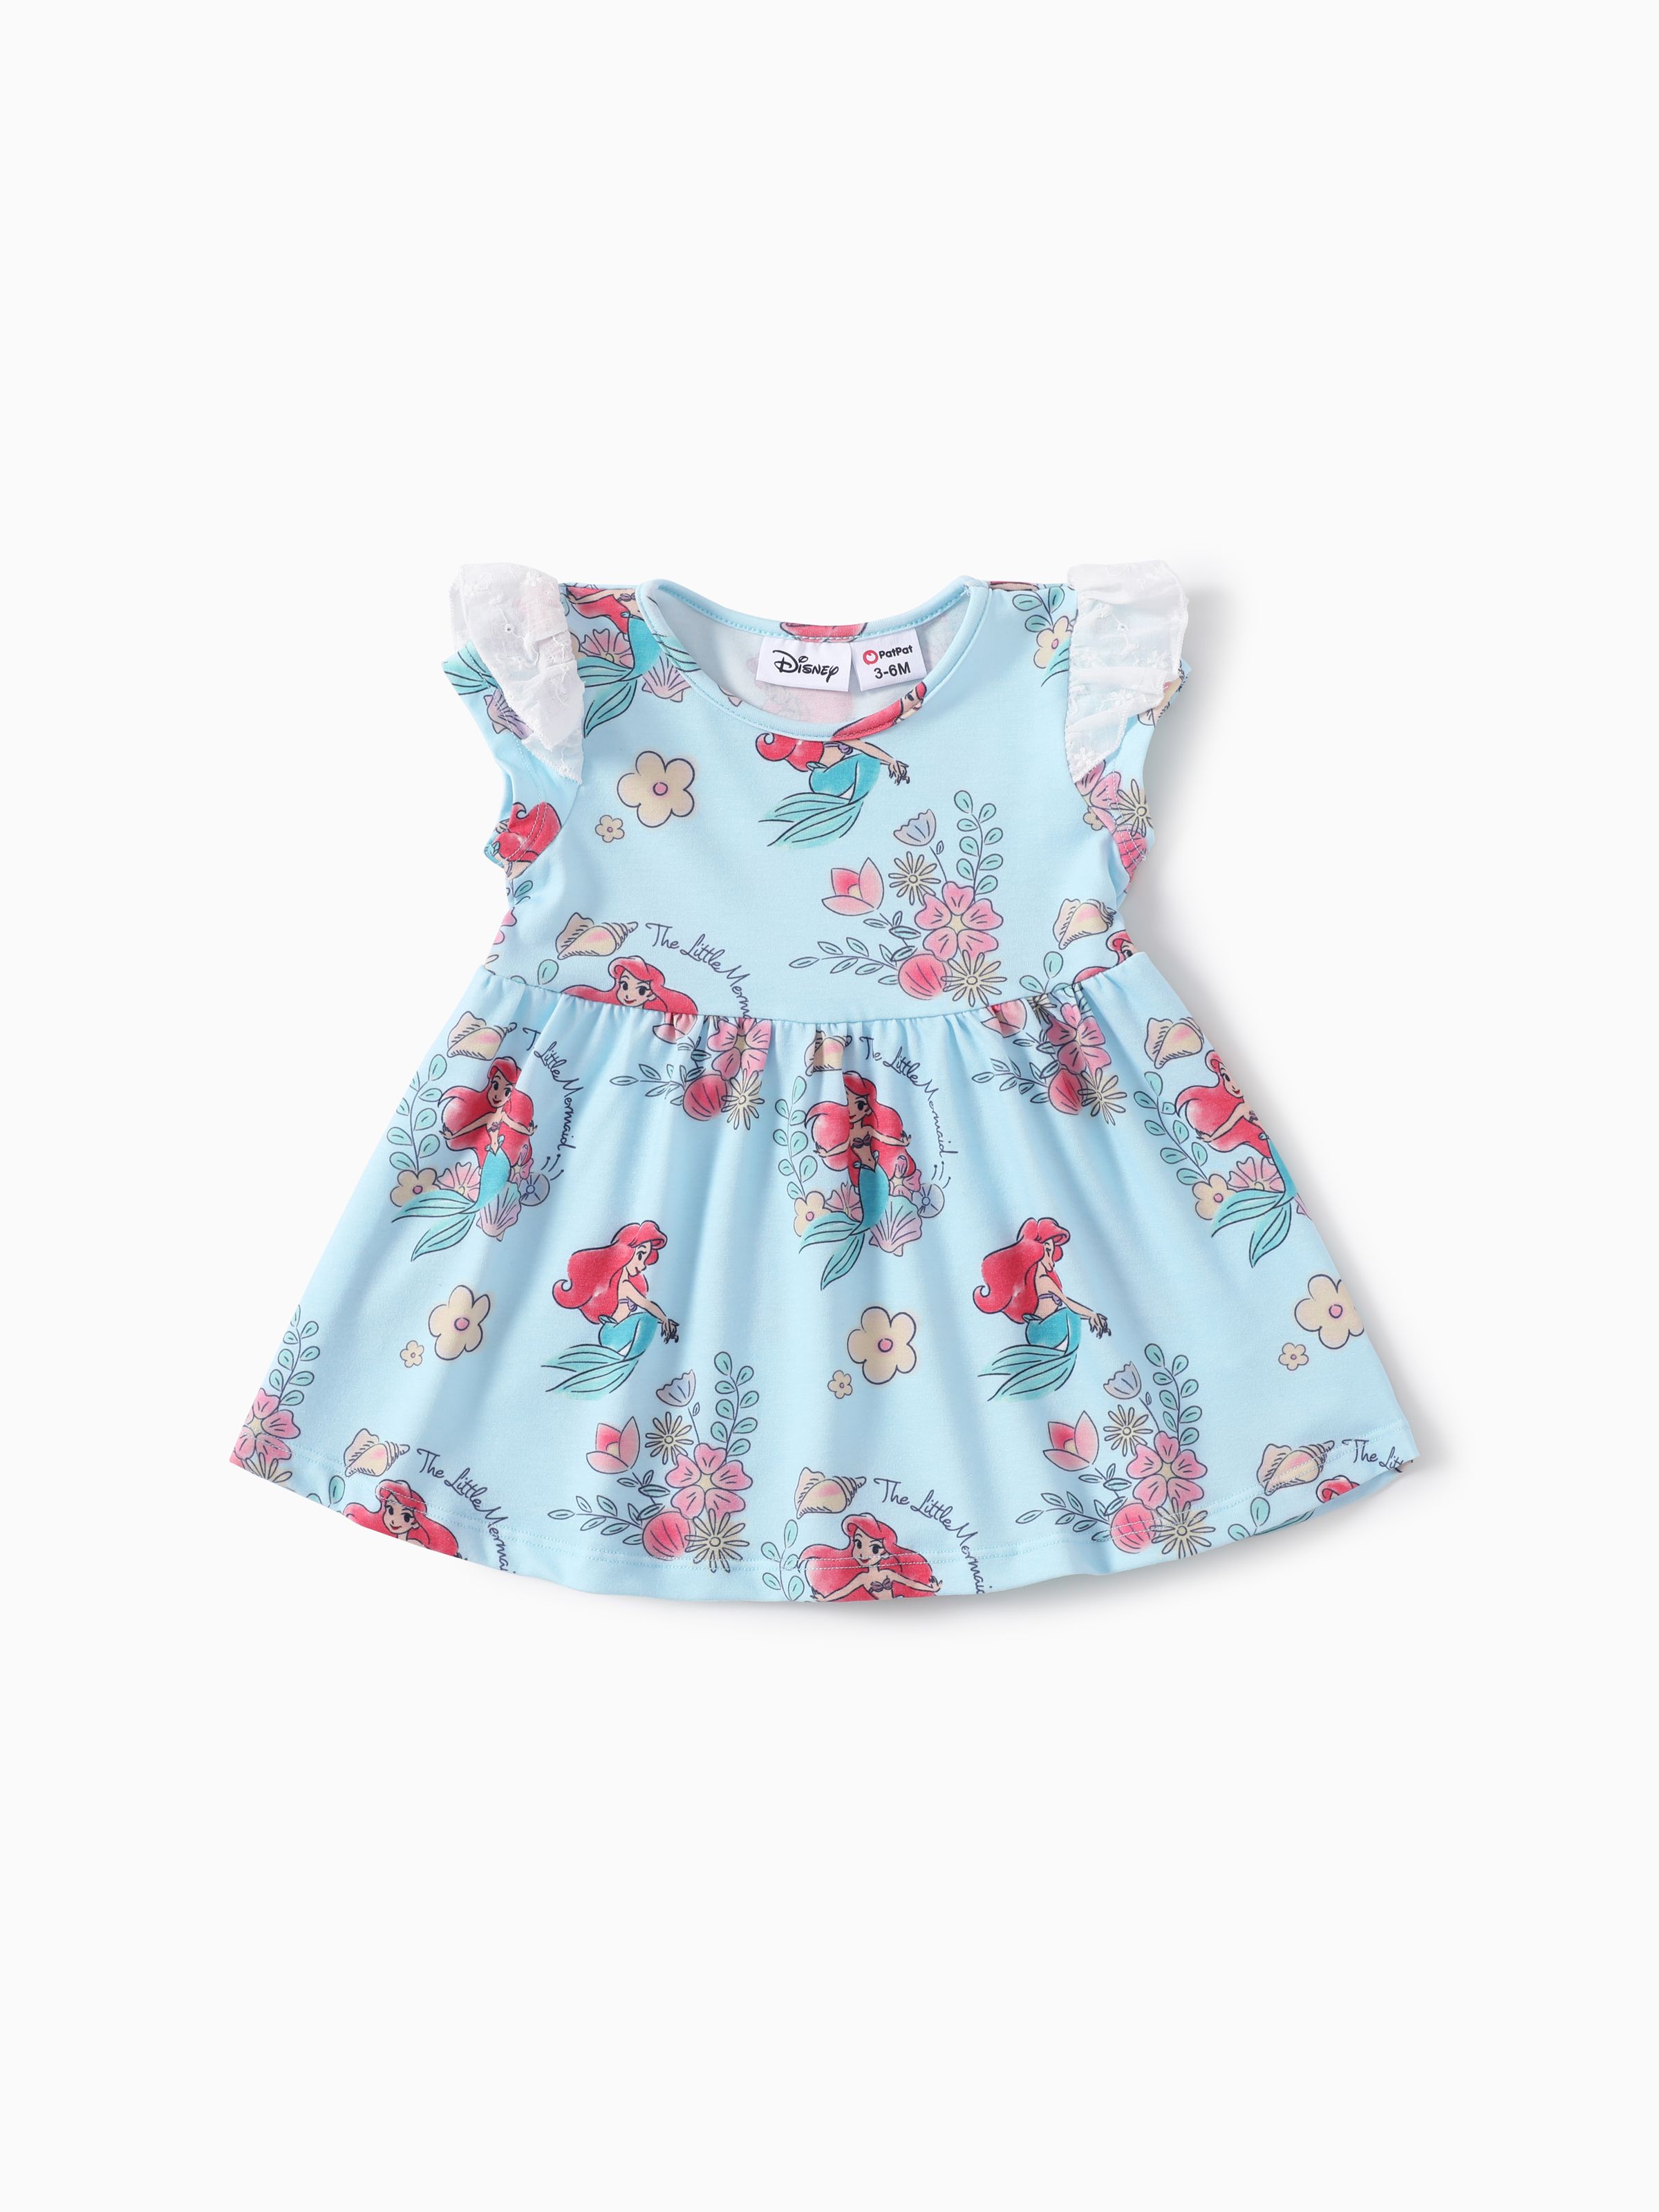 

Disney Princess Baby/Toddler Girls Ariel/Belle/Snow White 1pc Naia™ Character All-over Print Lace Ruffled-sleeve Dress